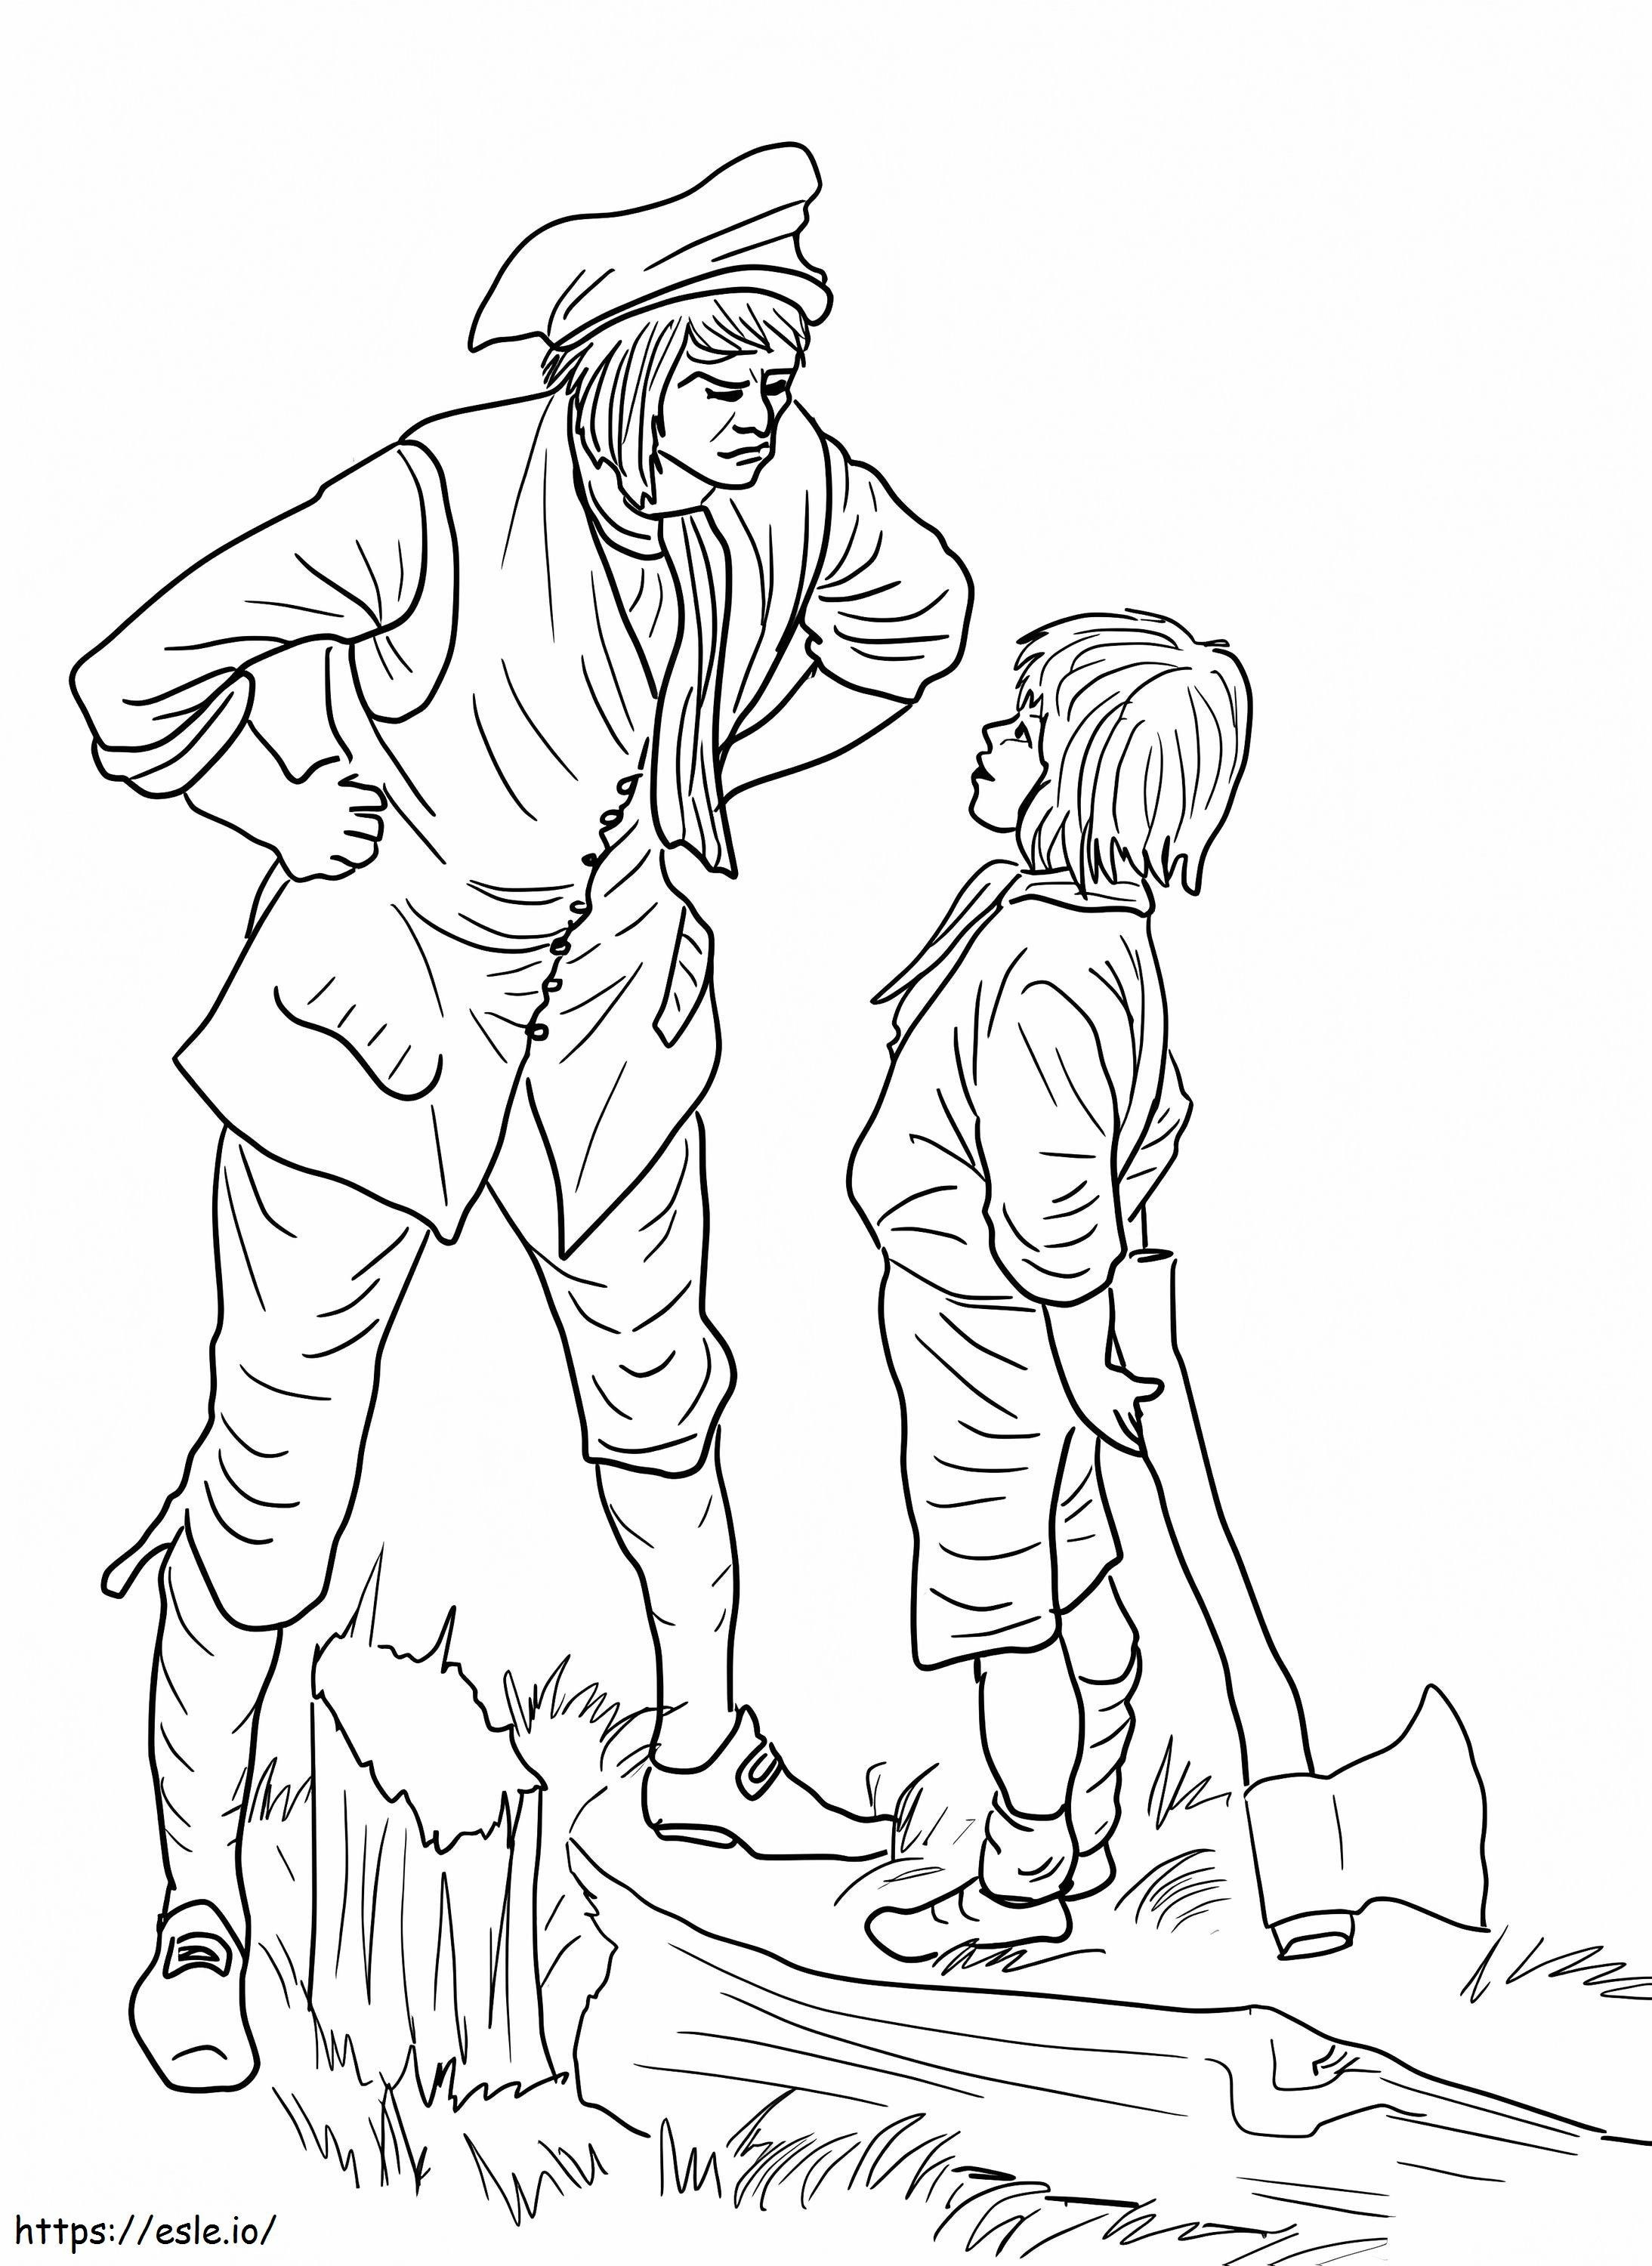 George Washington And The Cherry Tree coloring page